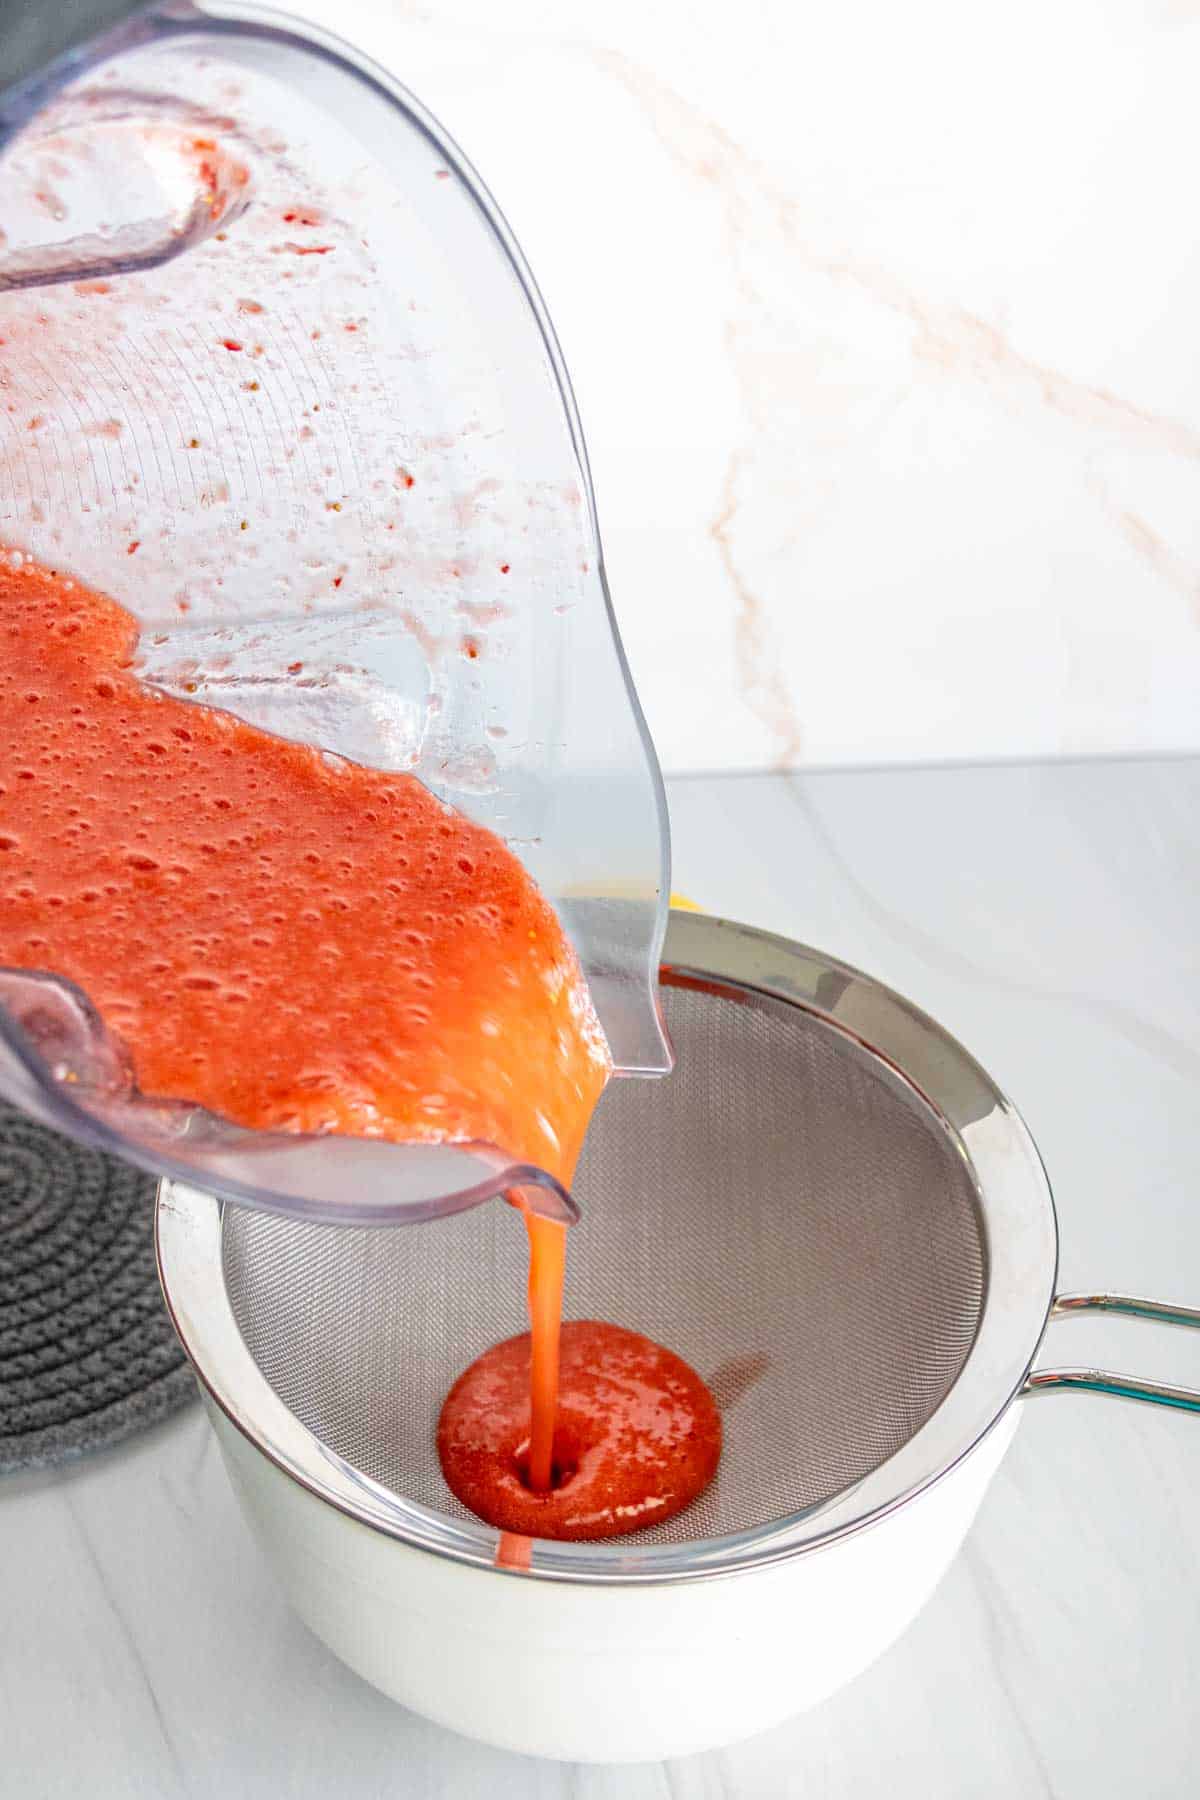 Pouring freshly blended strawberry puree through a fine mesh sieve into a white bowl on a marble countertop.